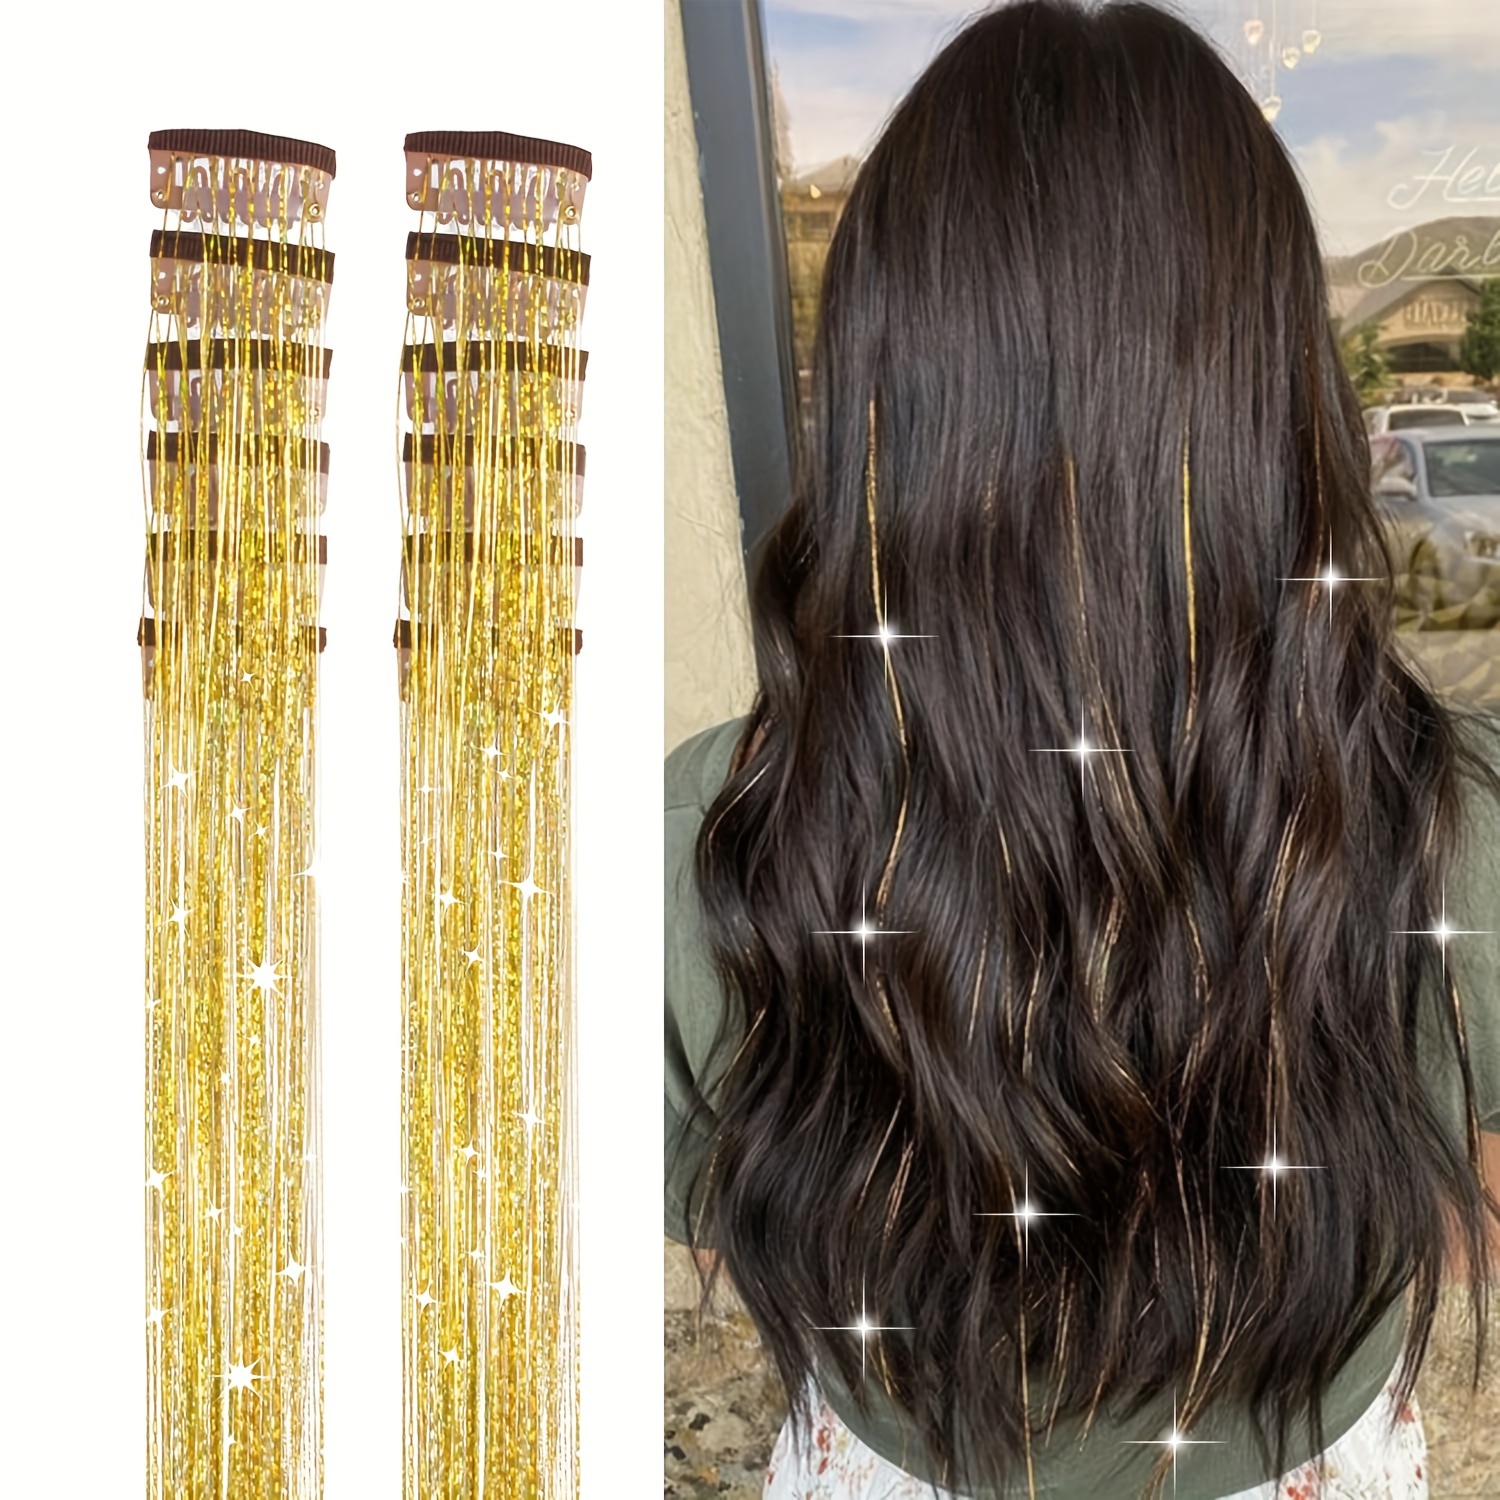 Y2K Party Glittery Tinsel Hair Extension 6pcs/set Clip in Hair Tinsel Kit Sparkle Hair Accessories for Women Girls Kids,Temu